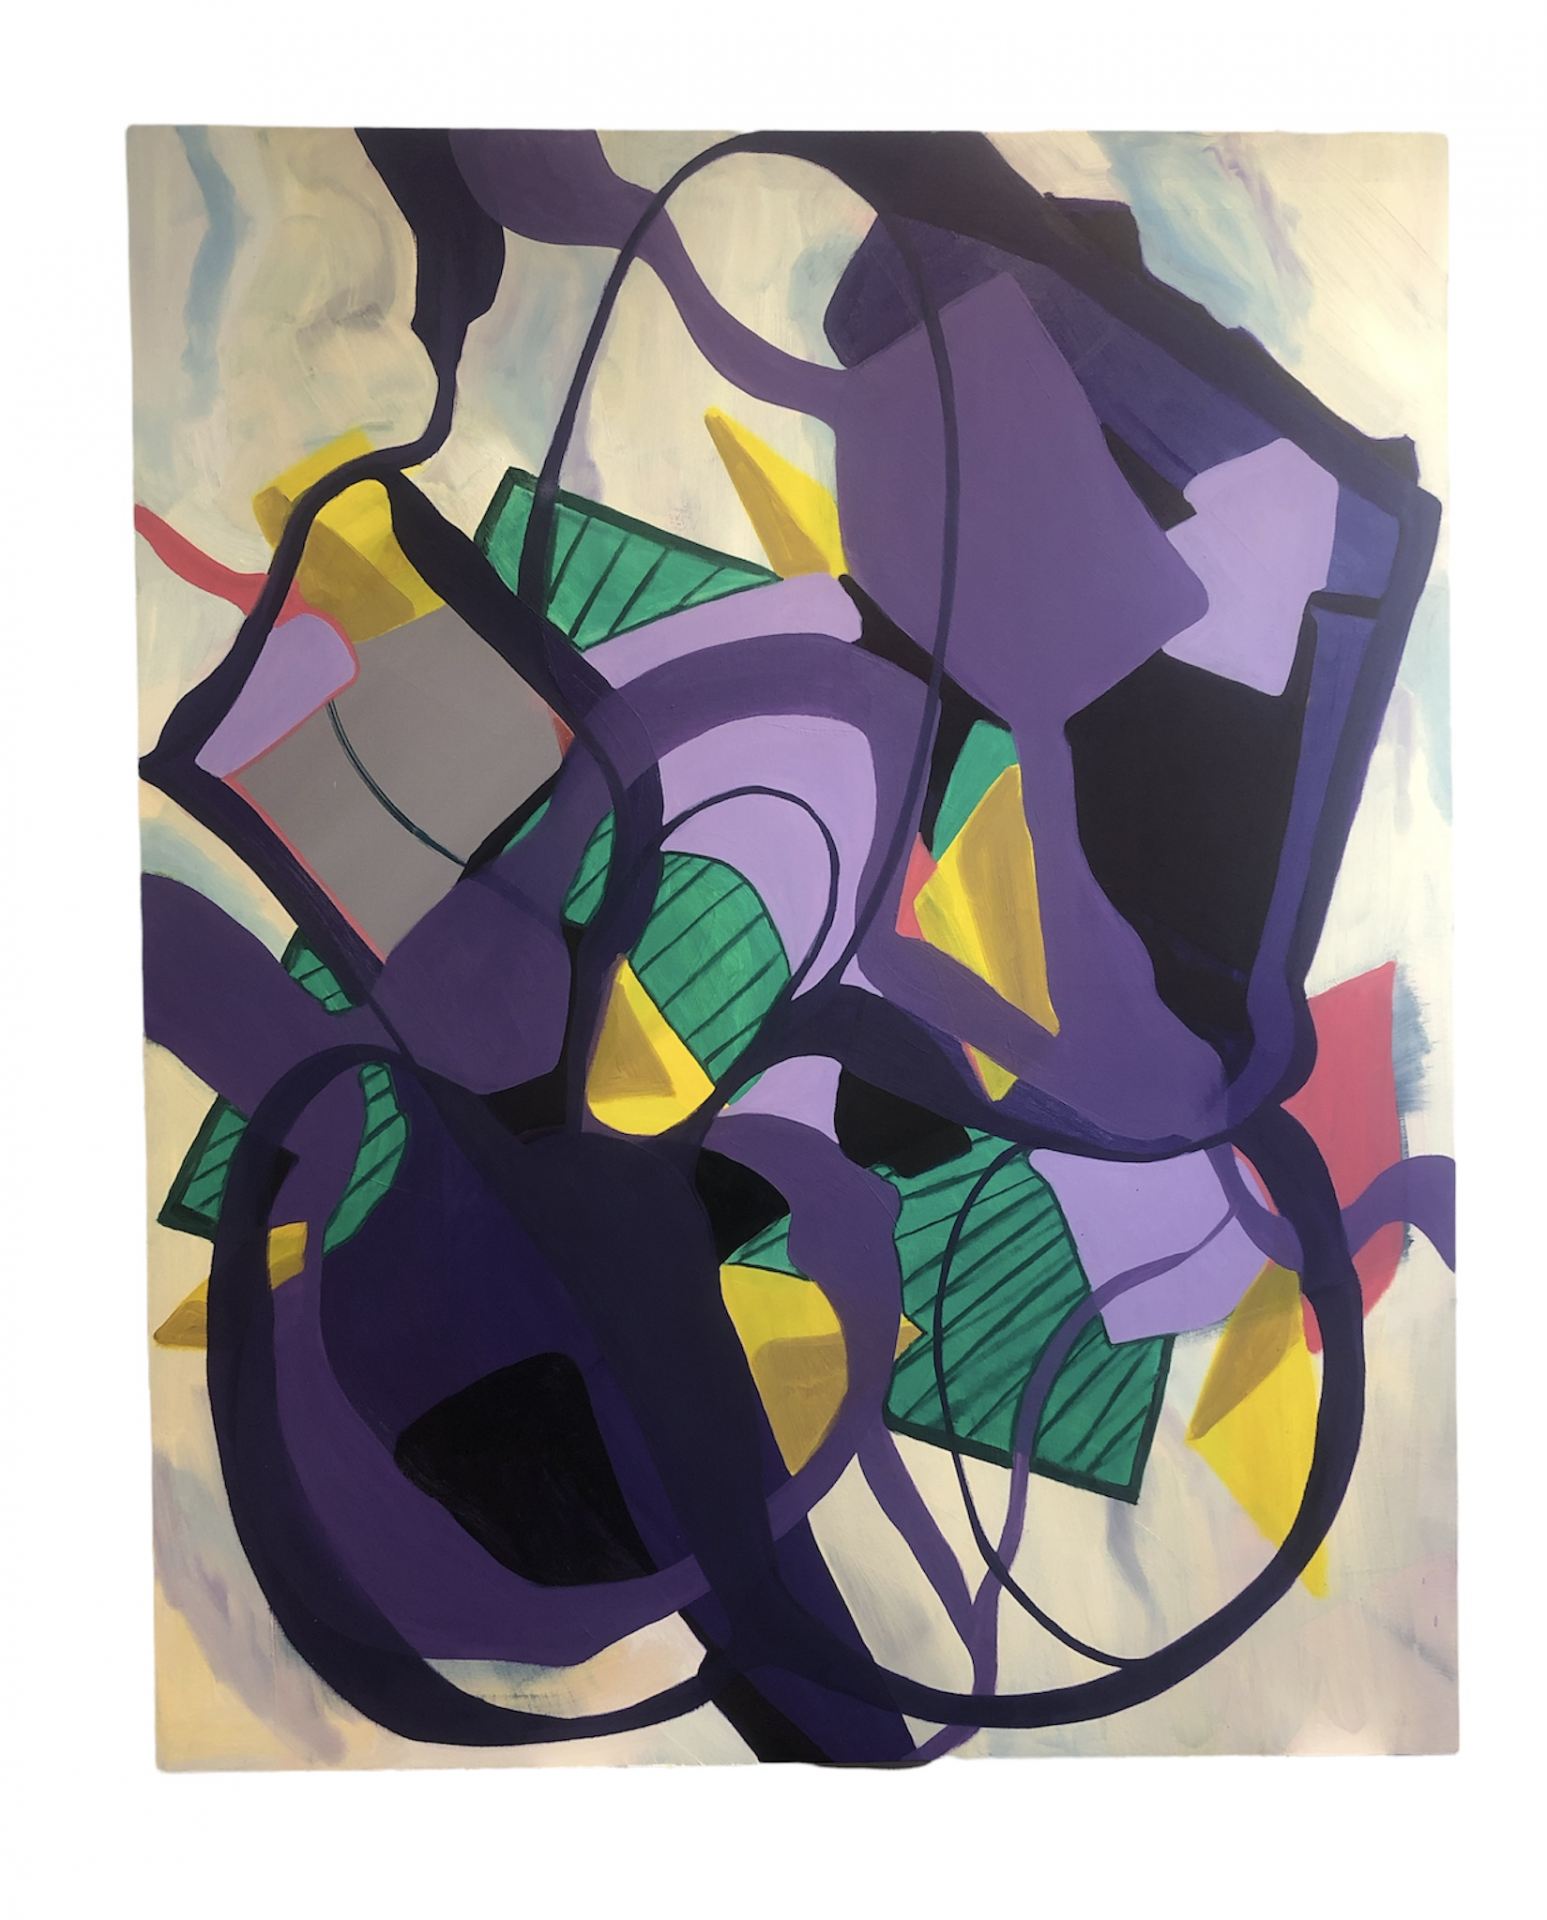 A colourful painting of abstract, curvalinear shapes.